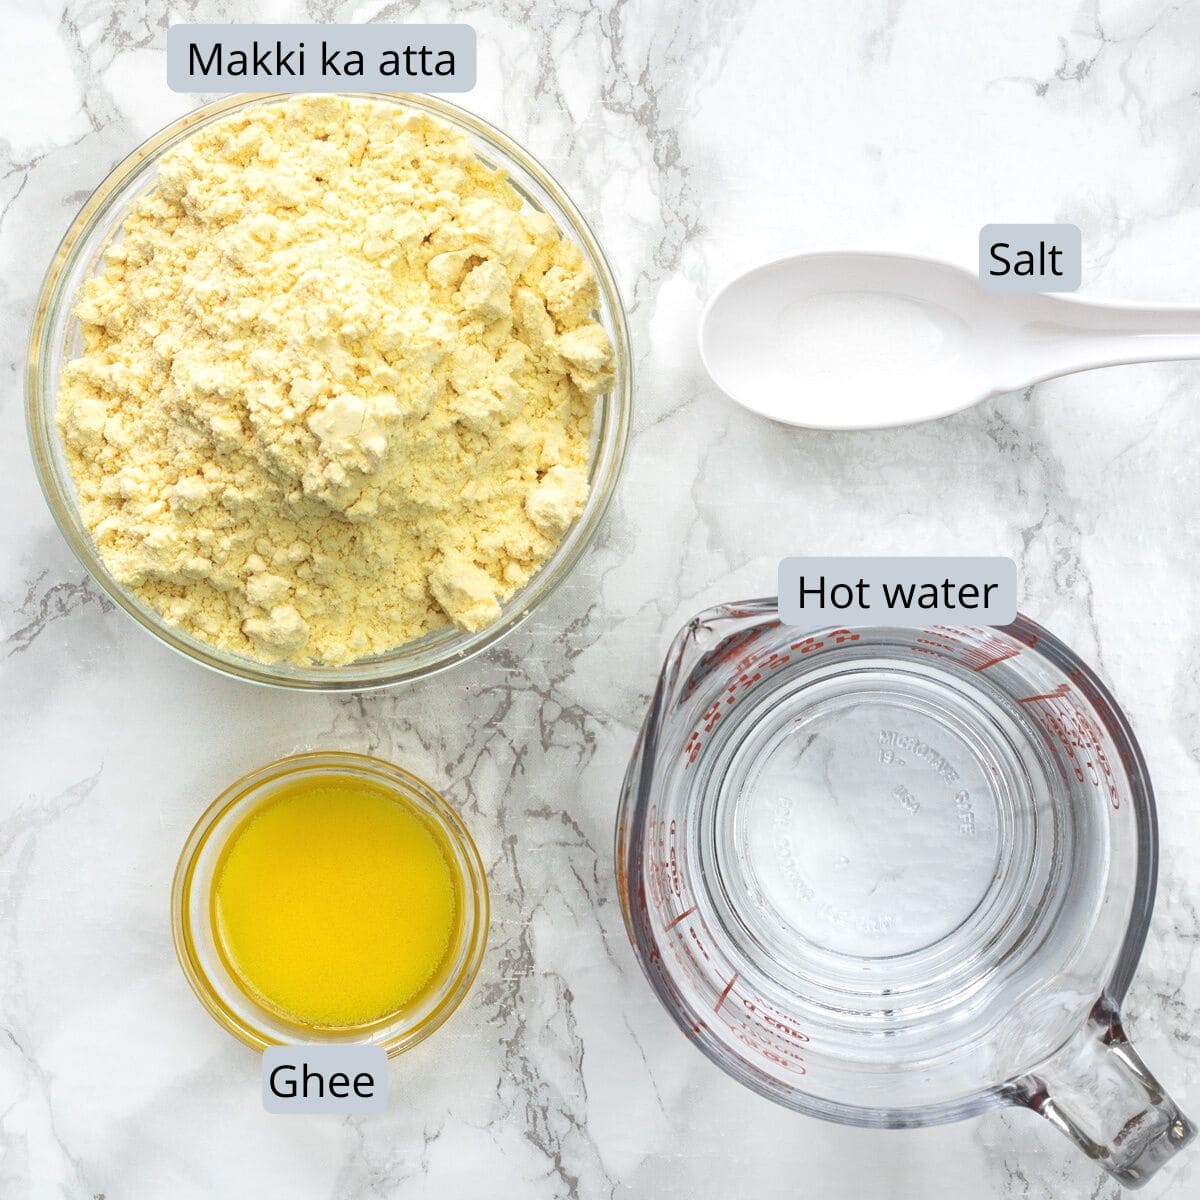 Makki ki roti ingredients in bowls and cups with labels.